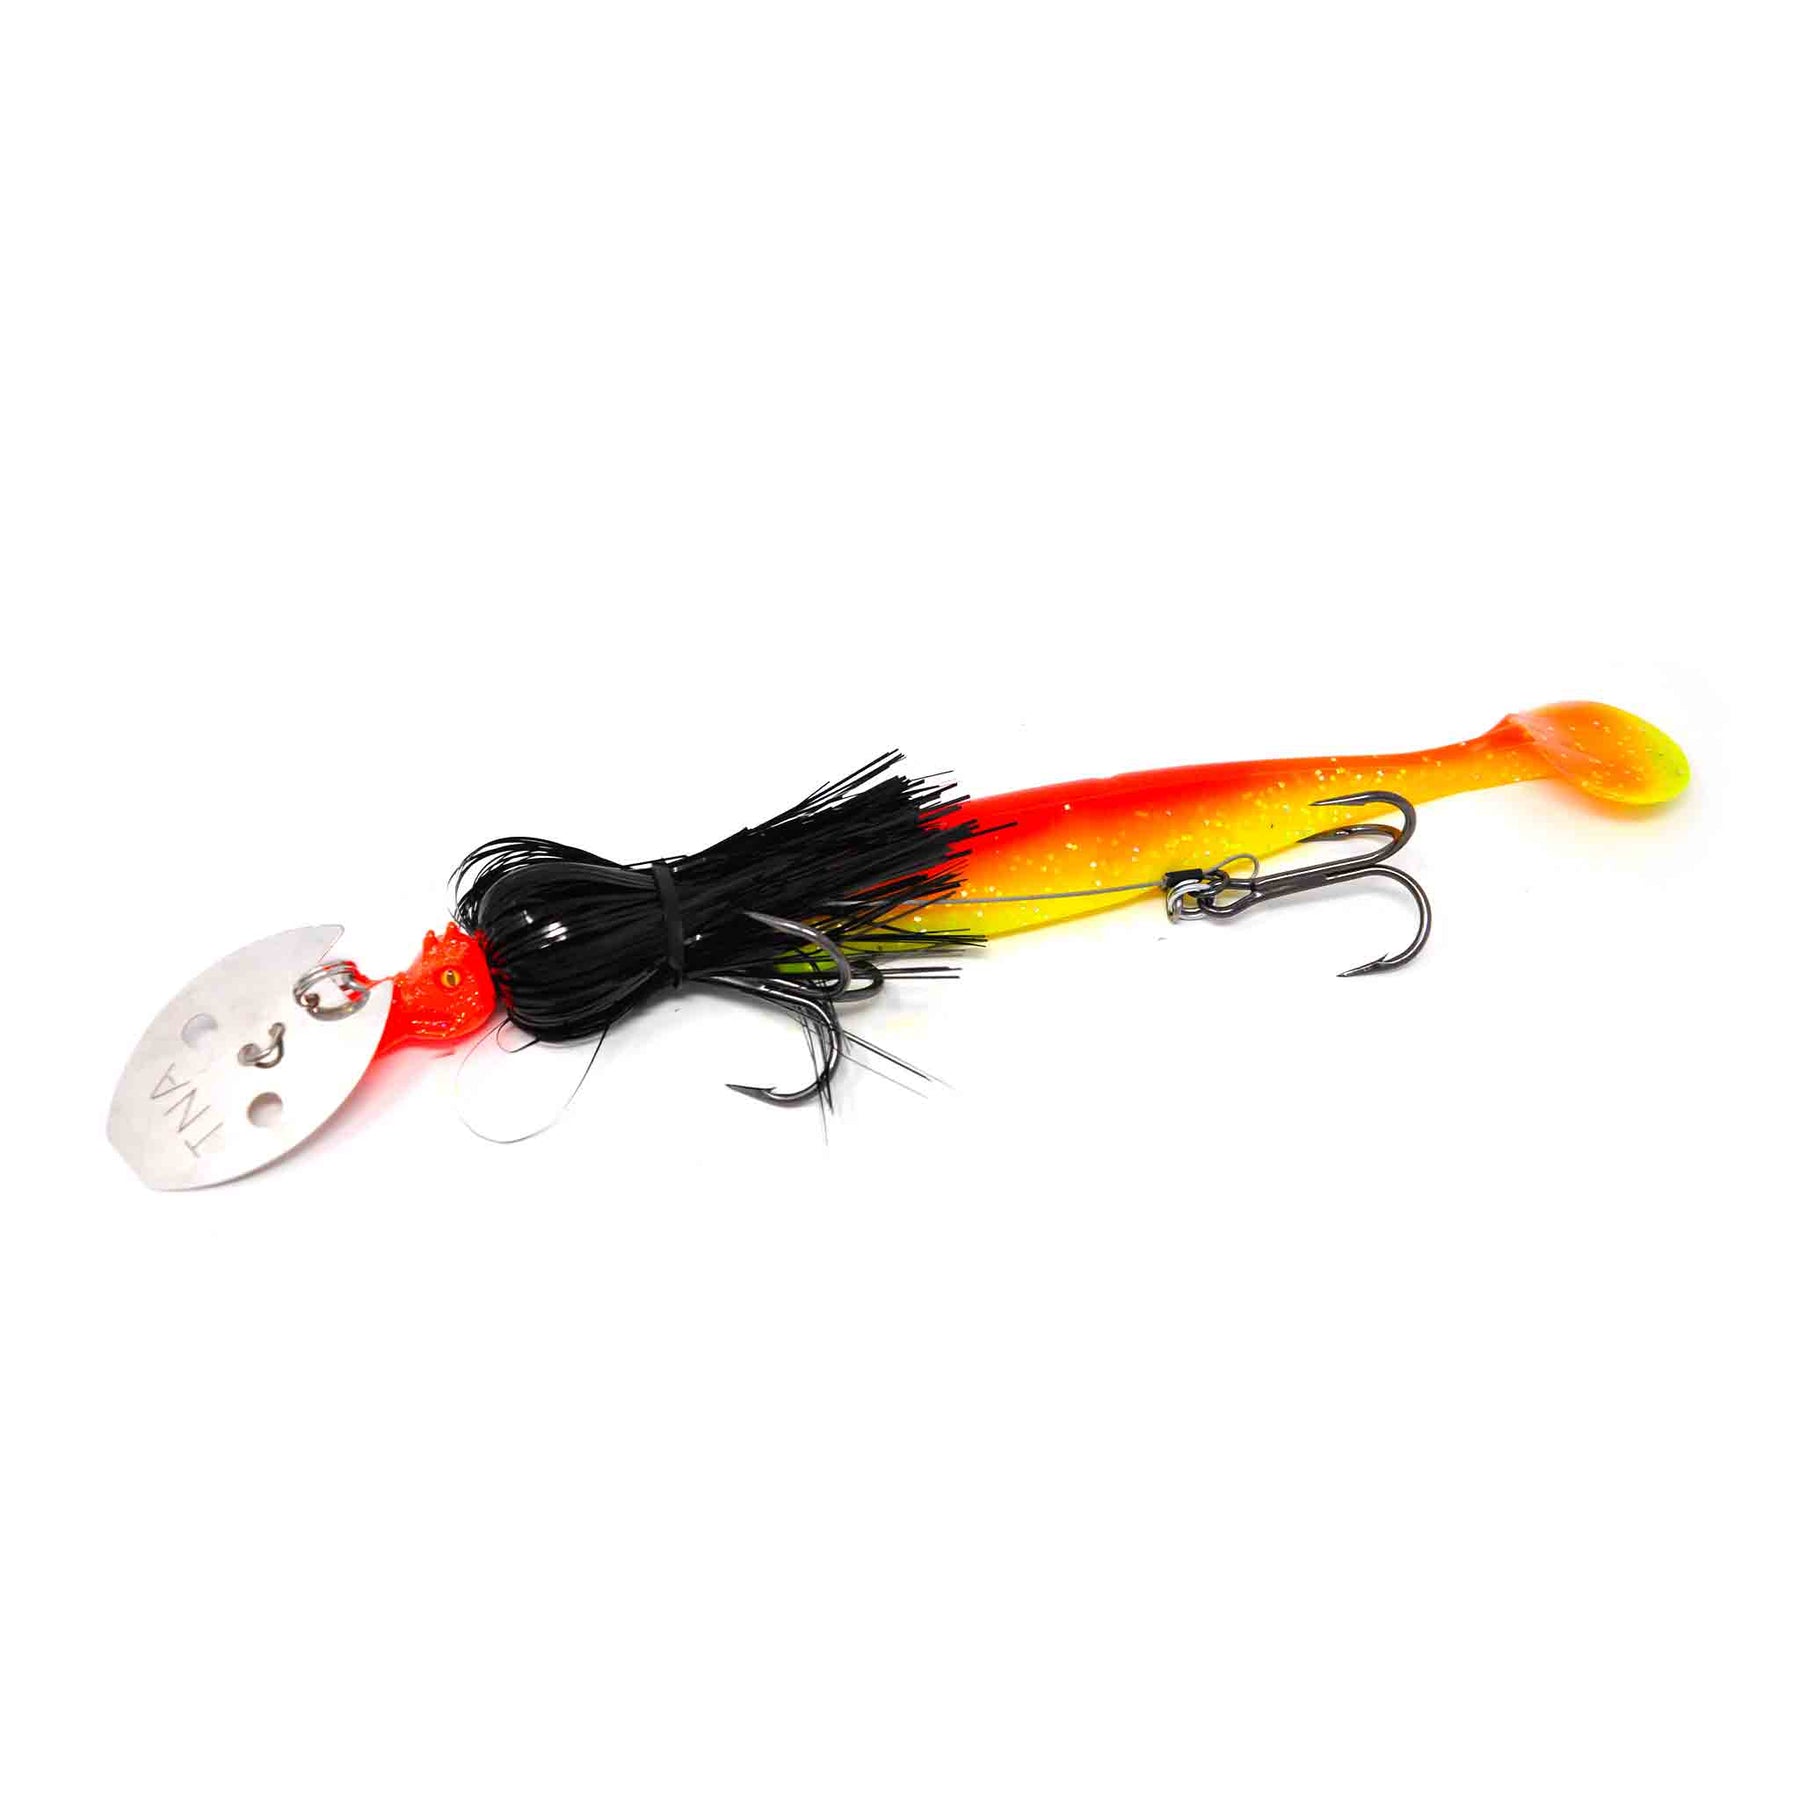 View of Chatterbaits TnA Tackle Waggin Dragon Chatterbait Black Flame available at EZOKO Pike and Musky Shop